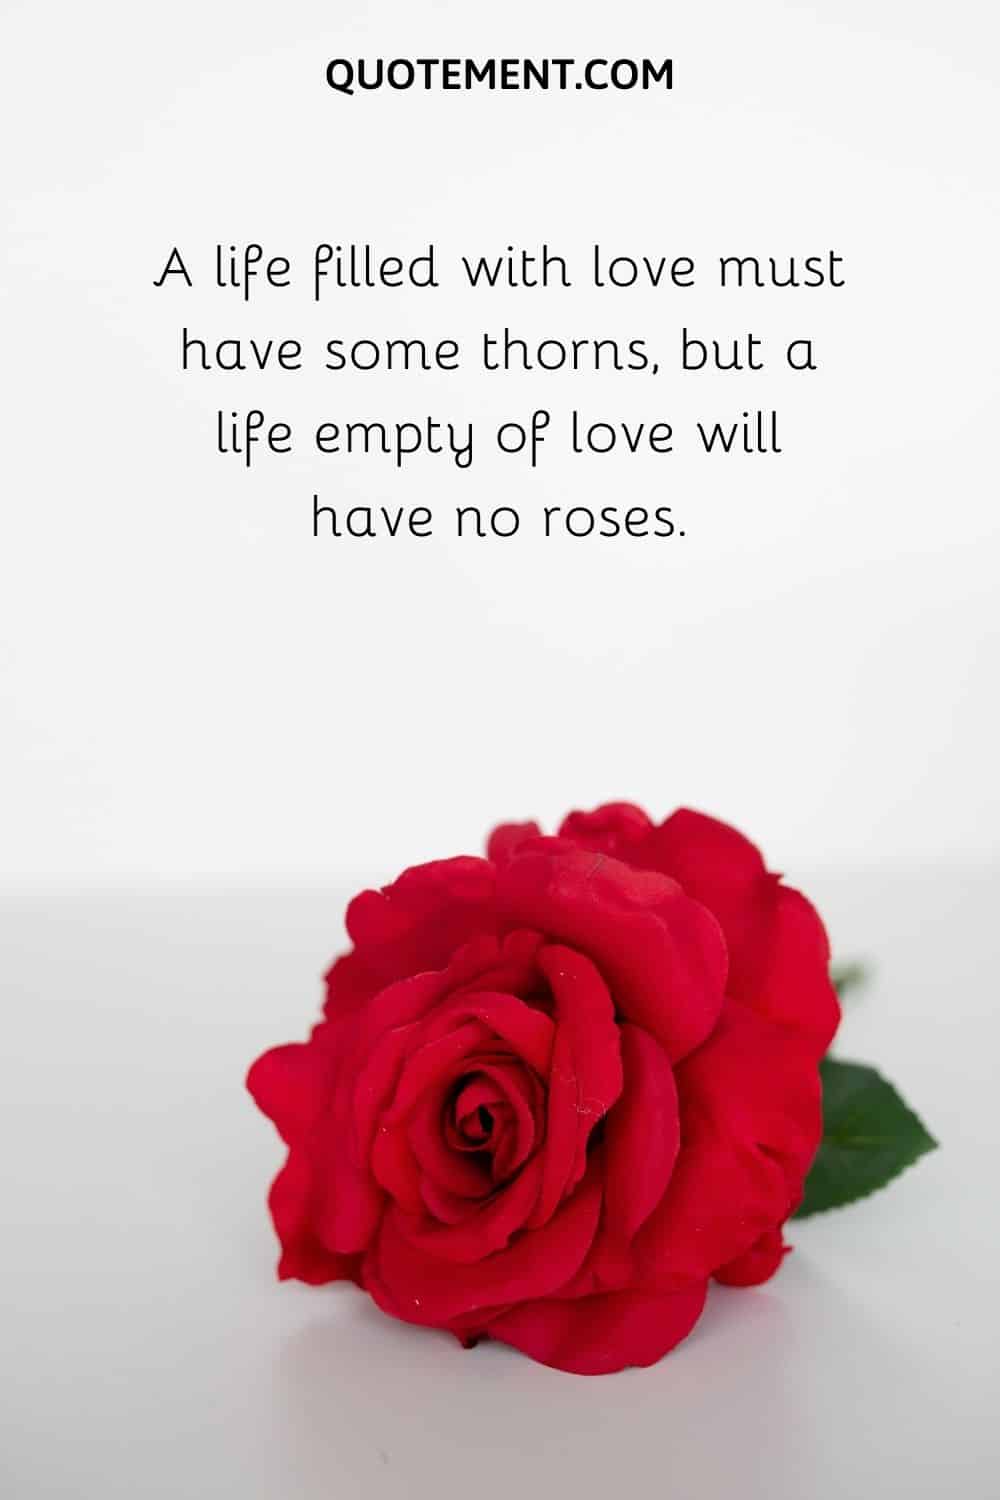 A life filled with love must have some thorns, but a life empty of love will have no roses.